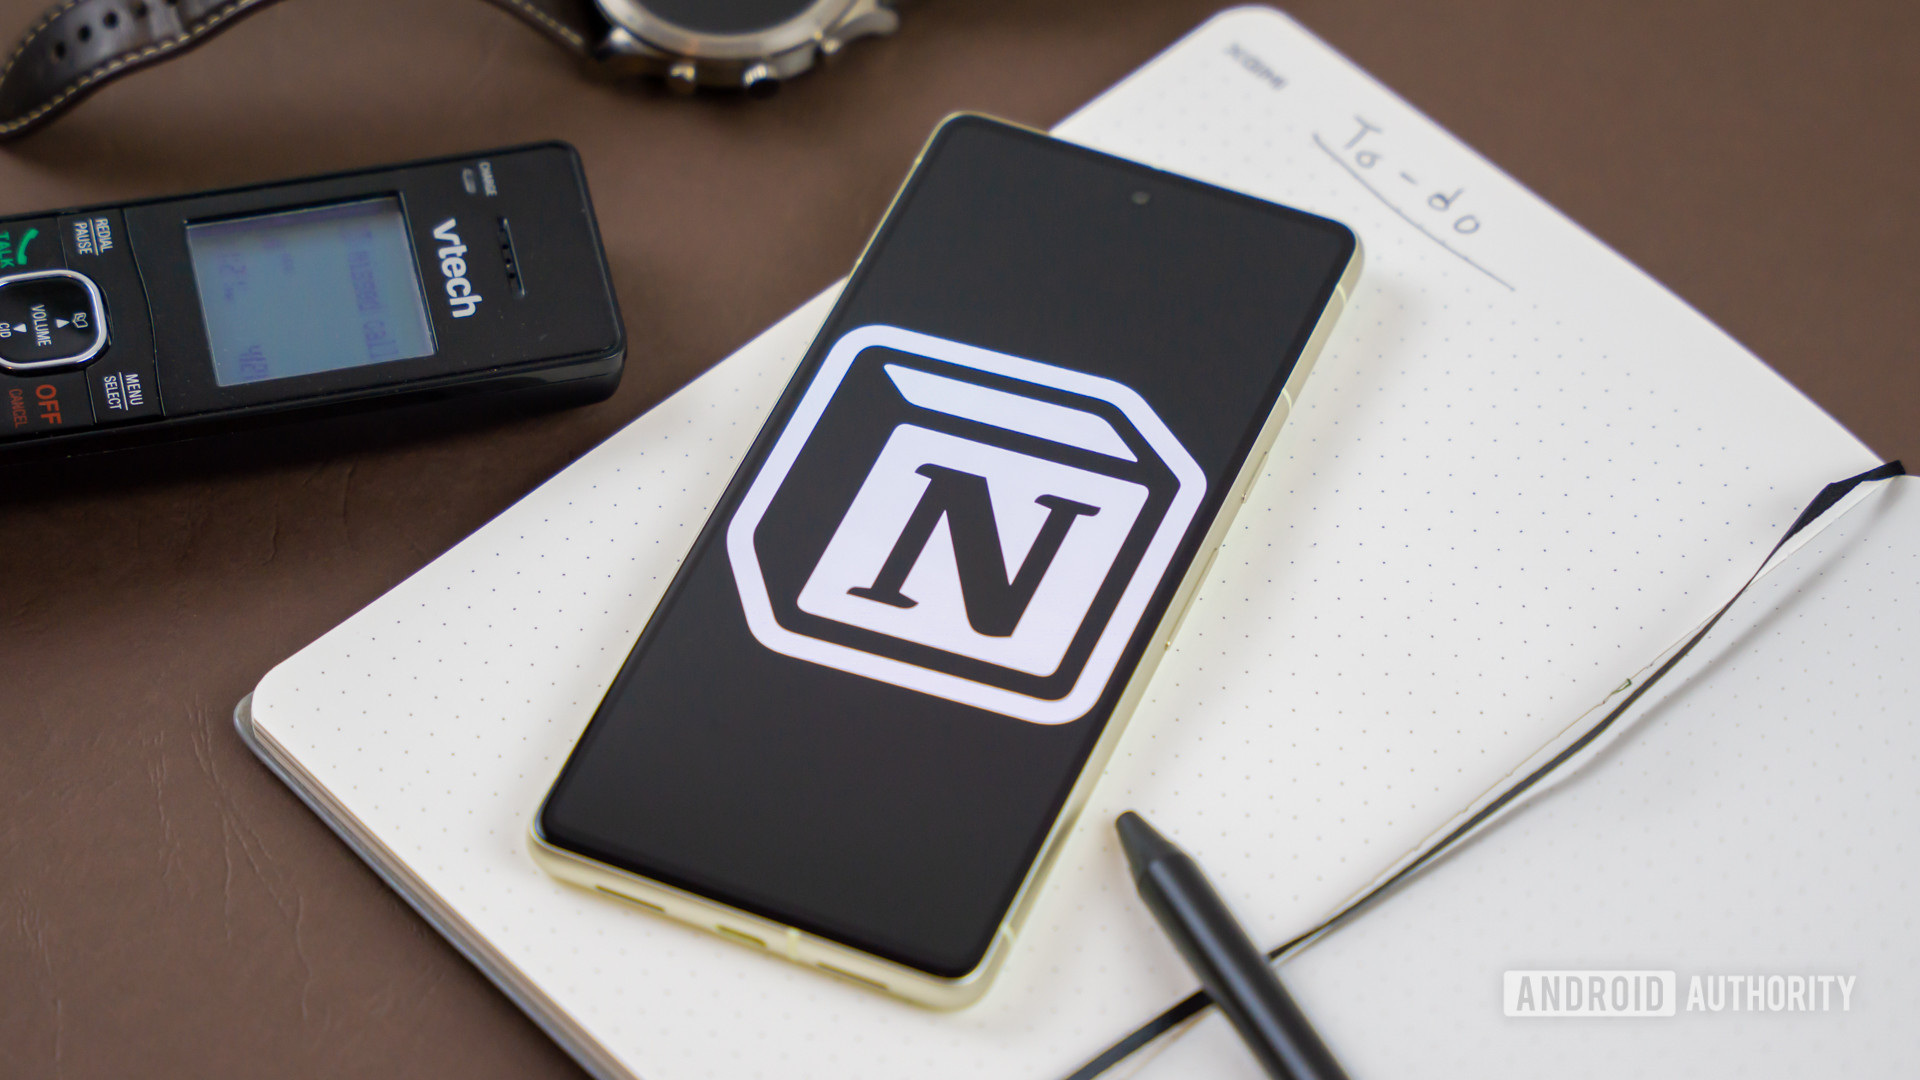 Notion logo on snartphone next to other office products Stock photo 2